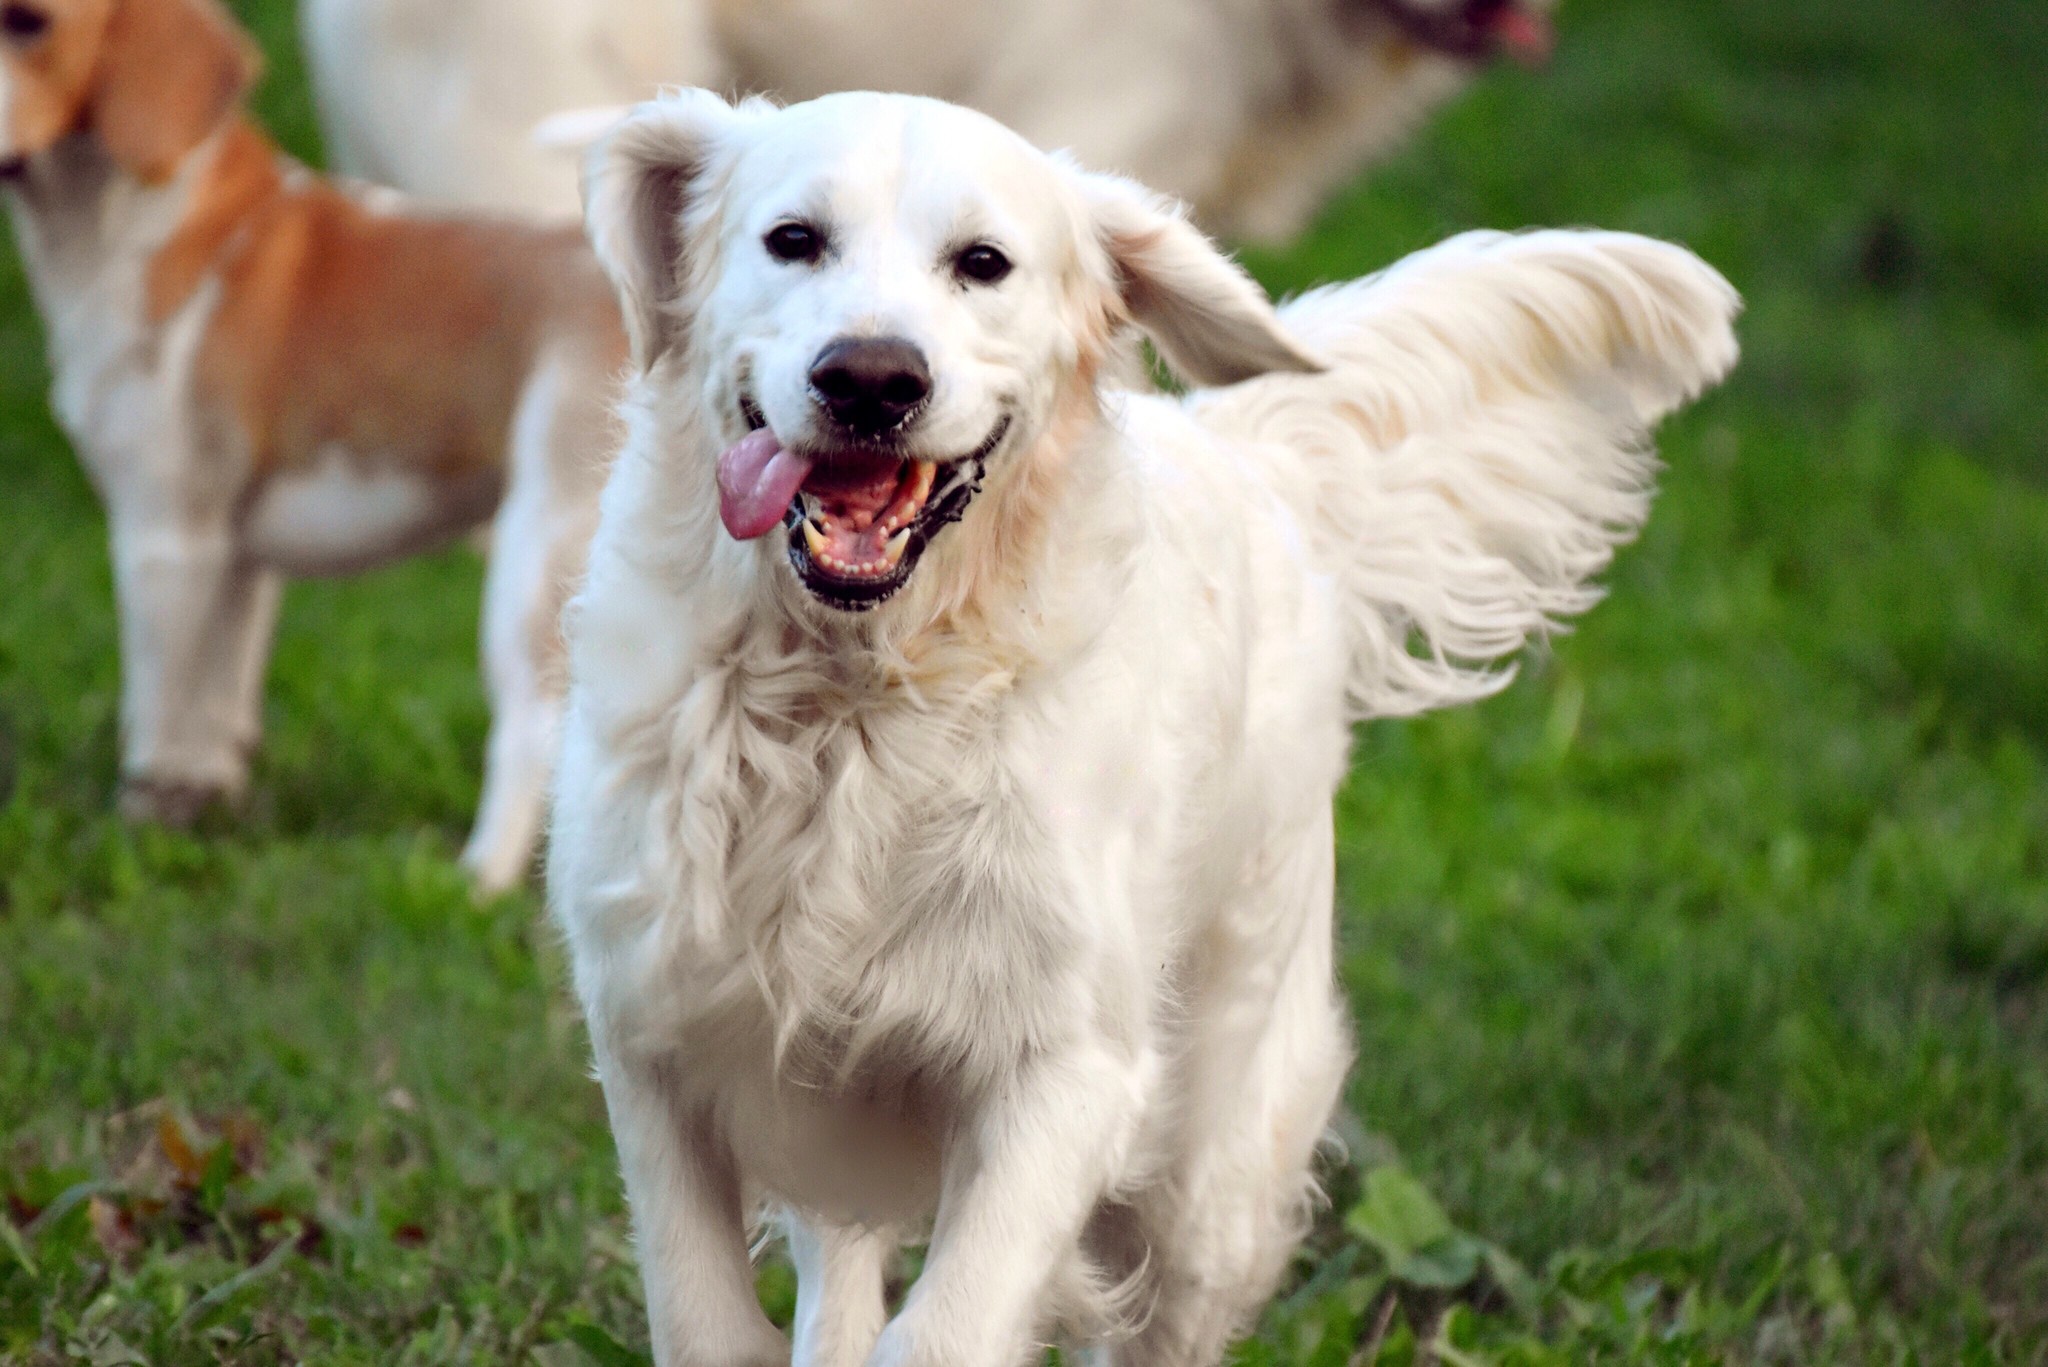 What are the benefits of probiotics for my pet?